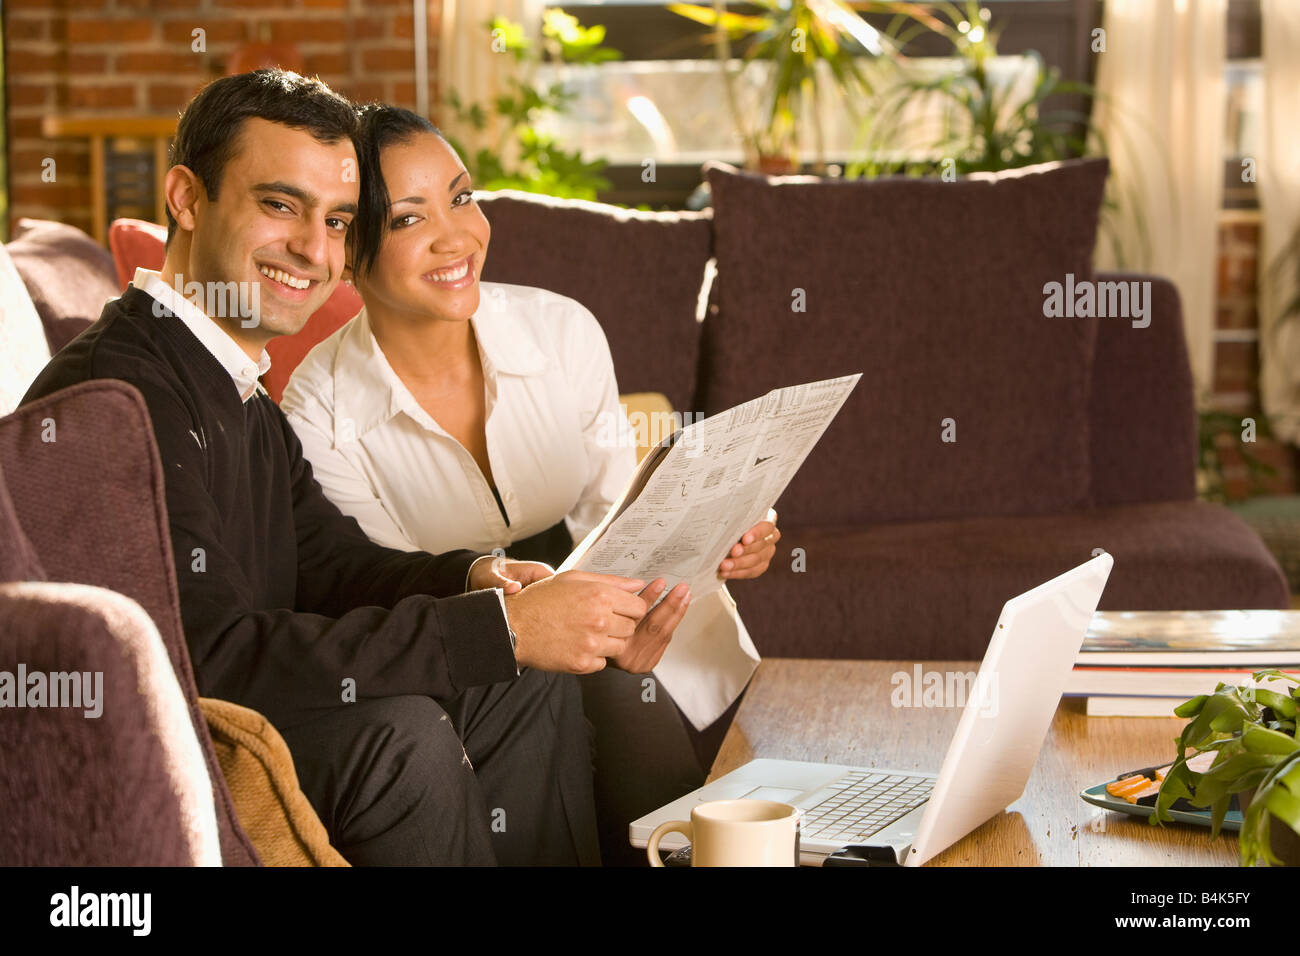 Mixed Race woman reading newspaper in living room Banque D'Images